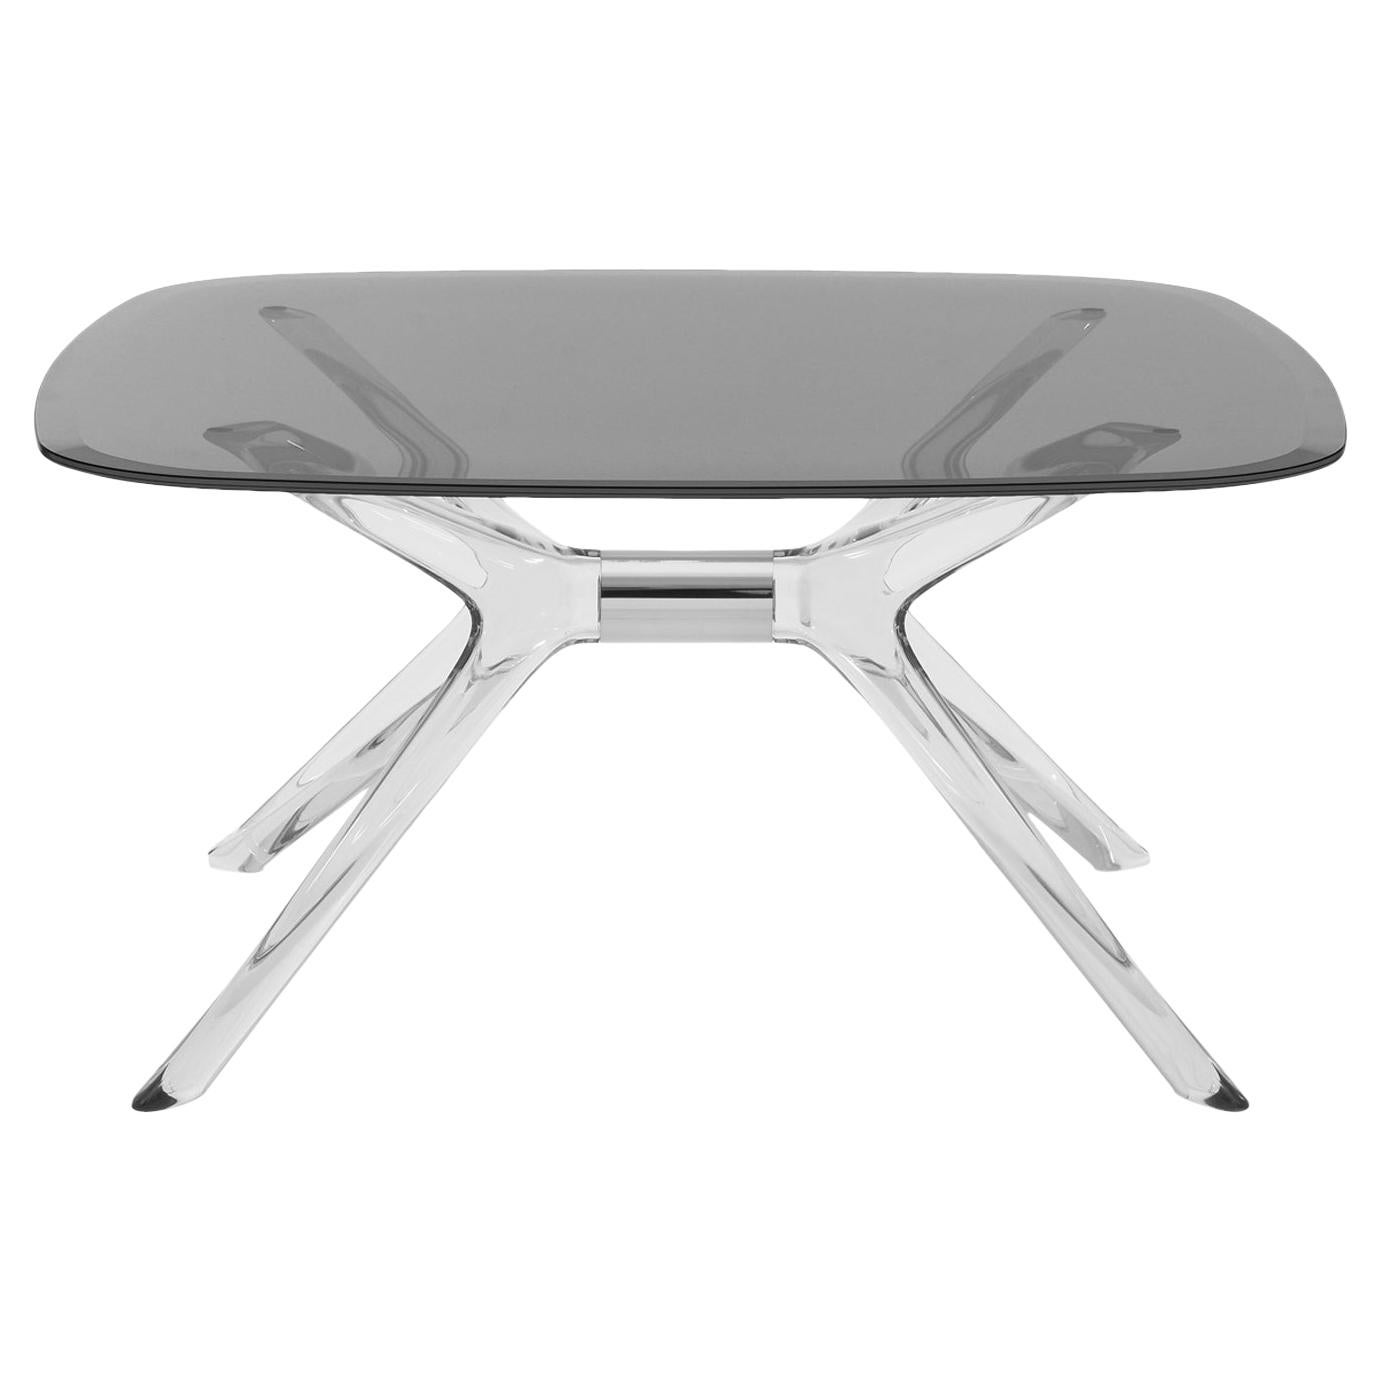 Kartell Blast Square Coffee Table in Chrome with Smoke Top by Philippe Starck